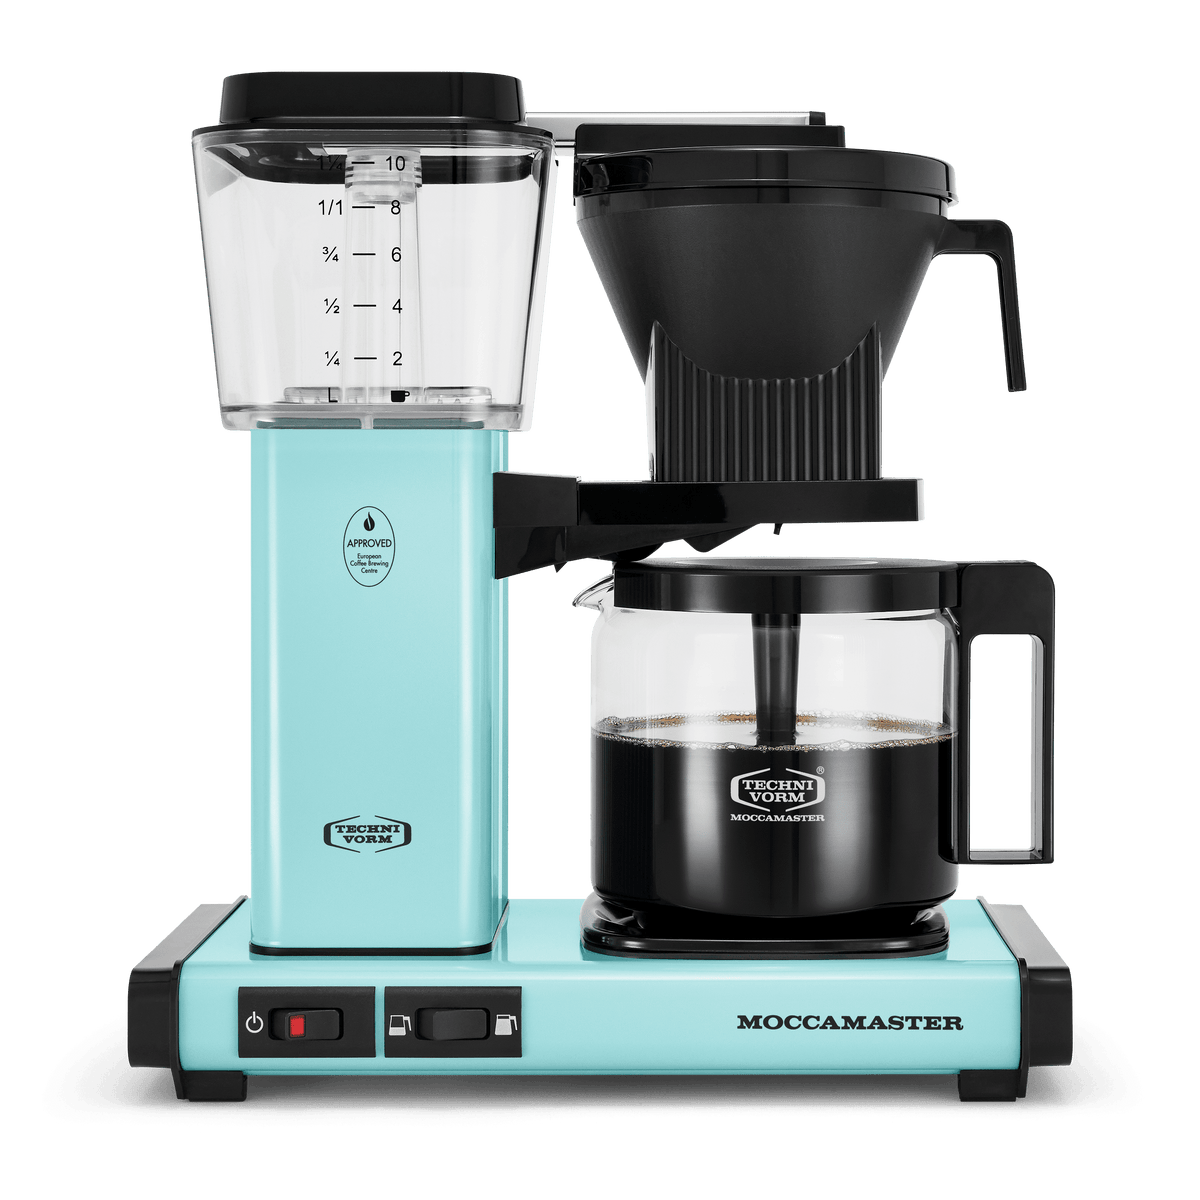 Front shot showing Moccamaster KBGV Select in Turquoise, with rectangular tower and base, clear acrylic water reservoir with fill level marks, power and volume selector switch, glass carafe with black handle, and black automatic brew basket.